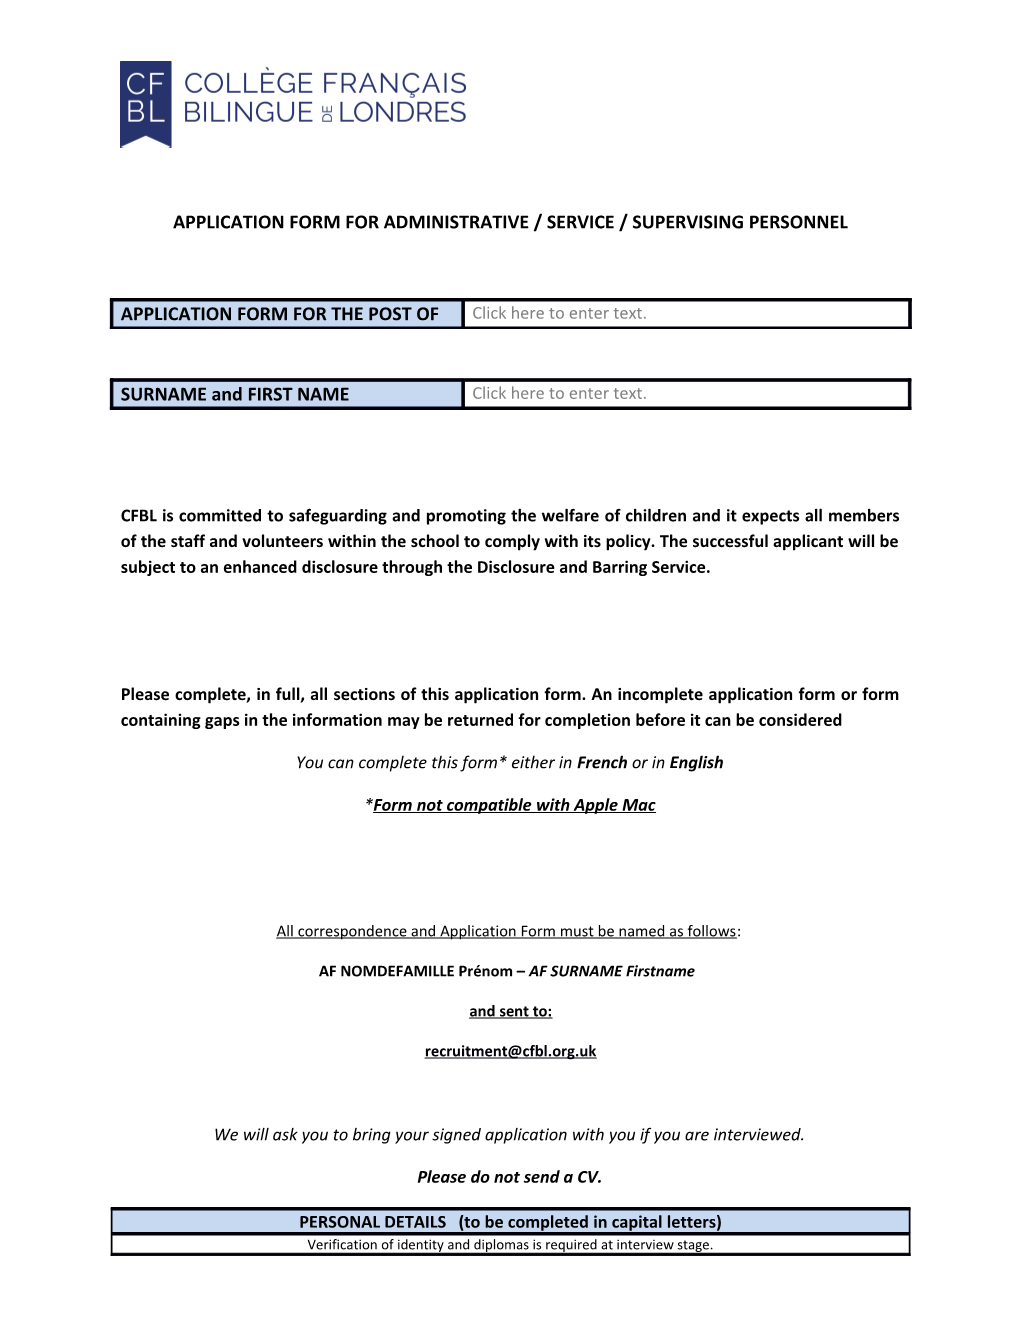 Application Form for Administrative / Service / Supervising Personnel